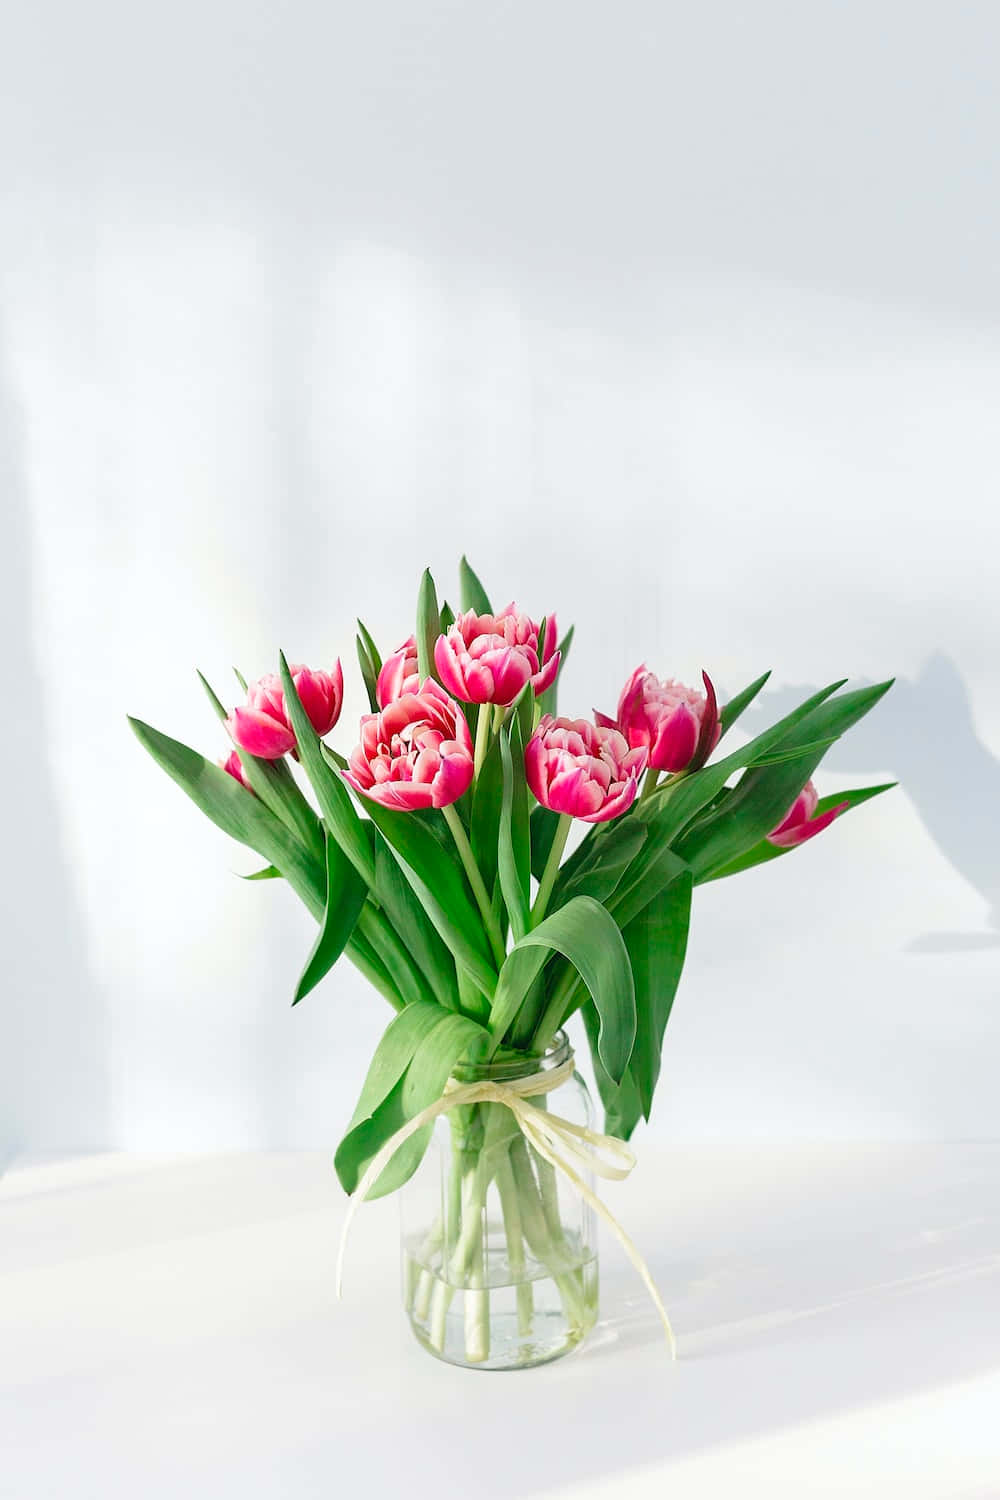 Brighten your spring with a colorful Tulip blossom, guaranteed to bring beauty to any view